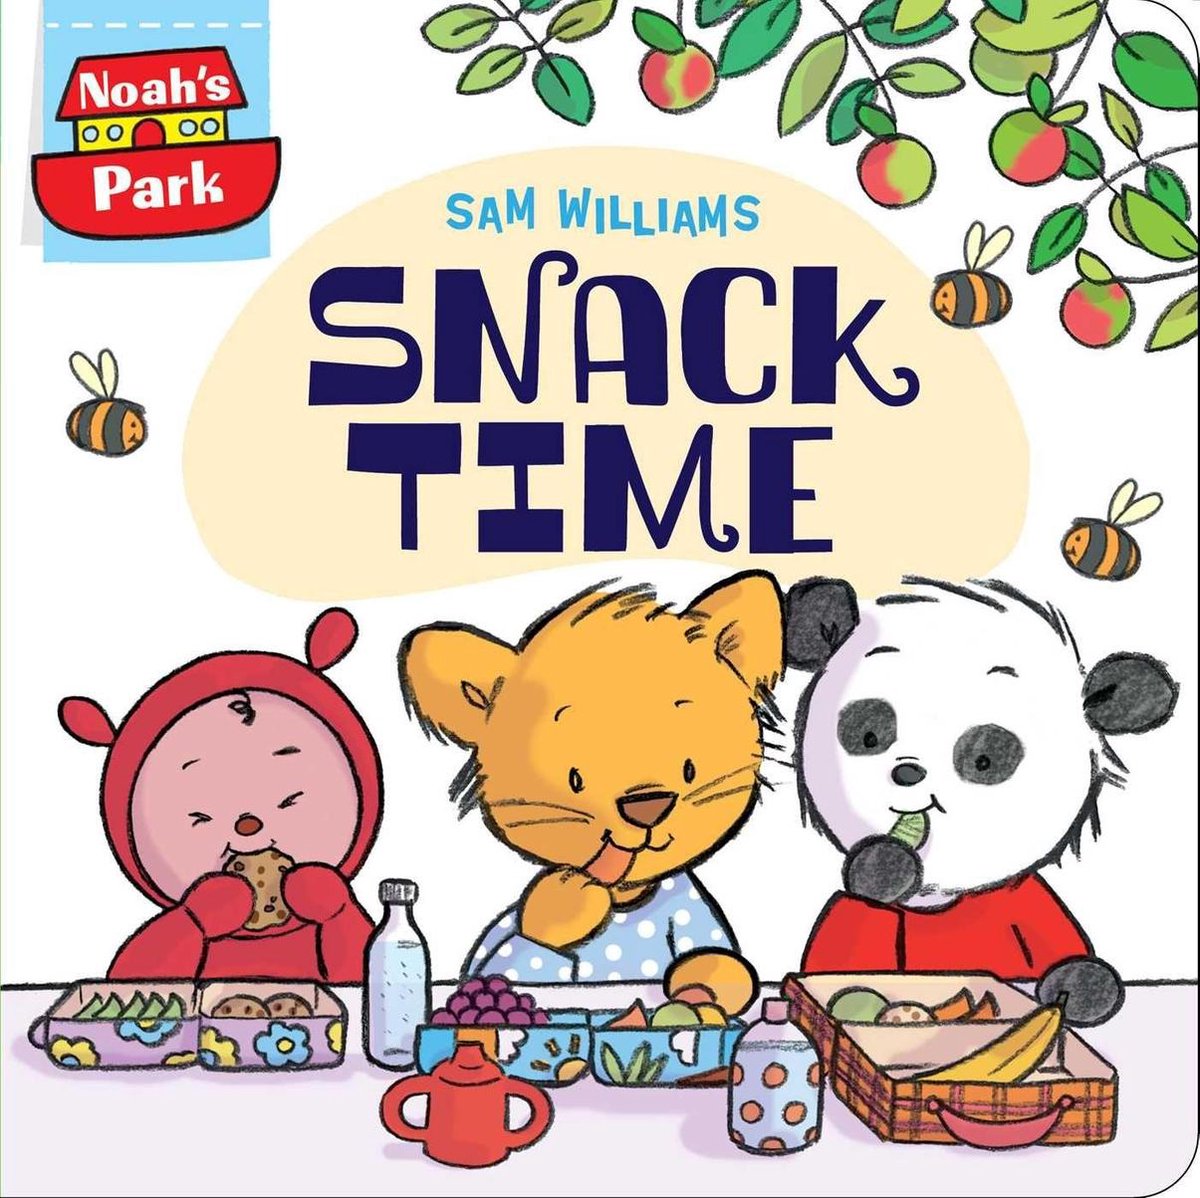 Snack time pictures